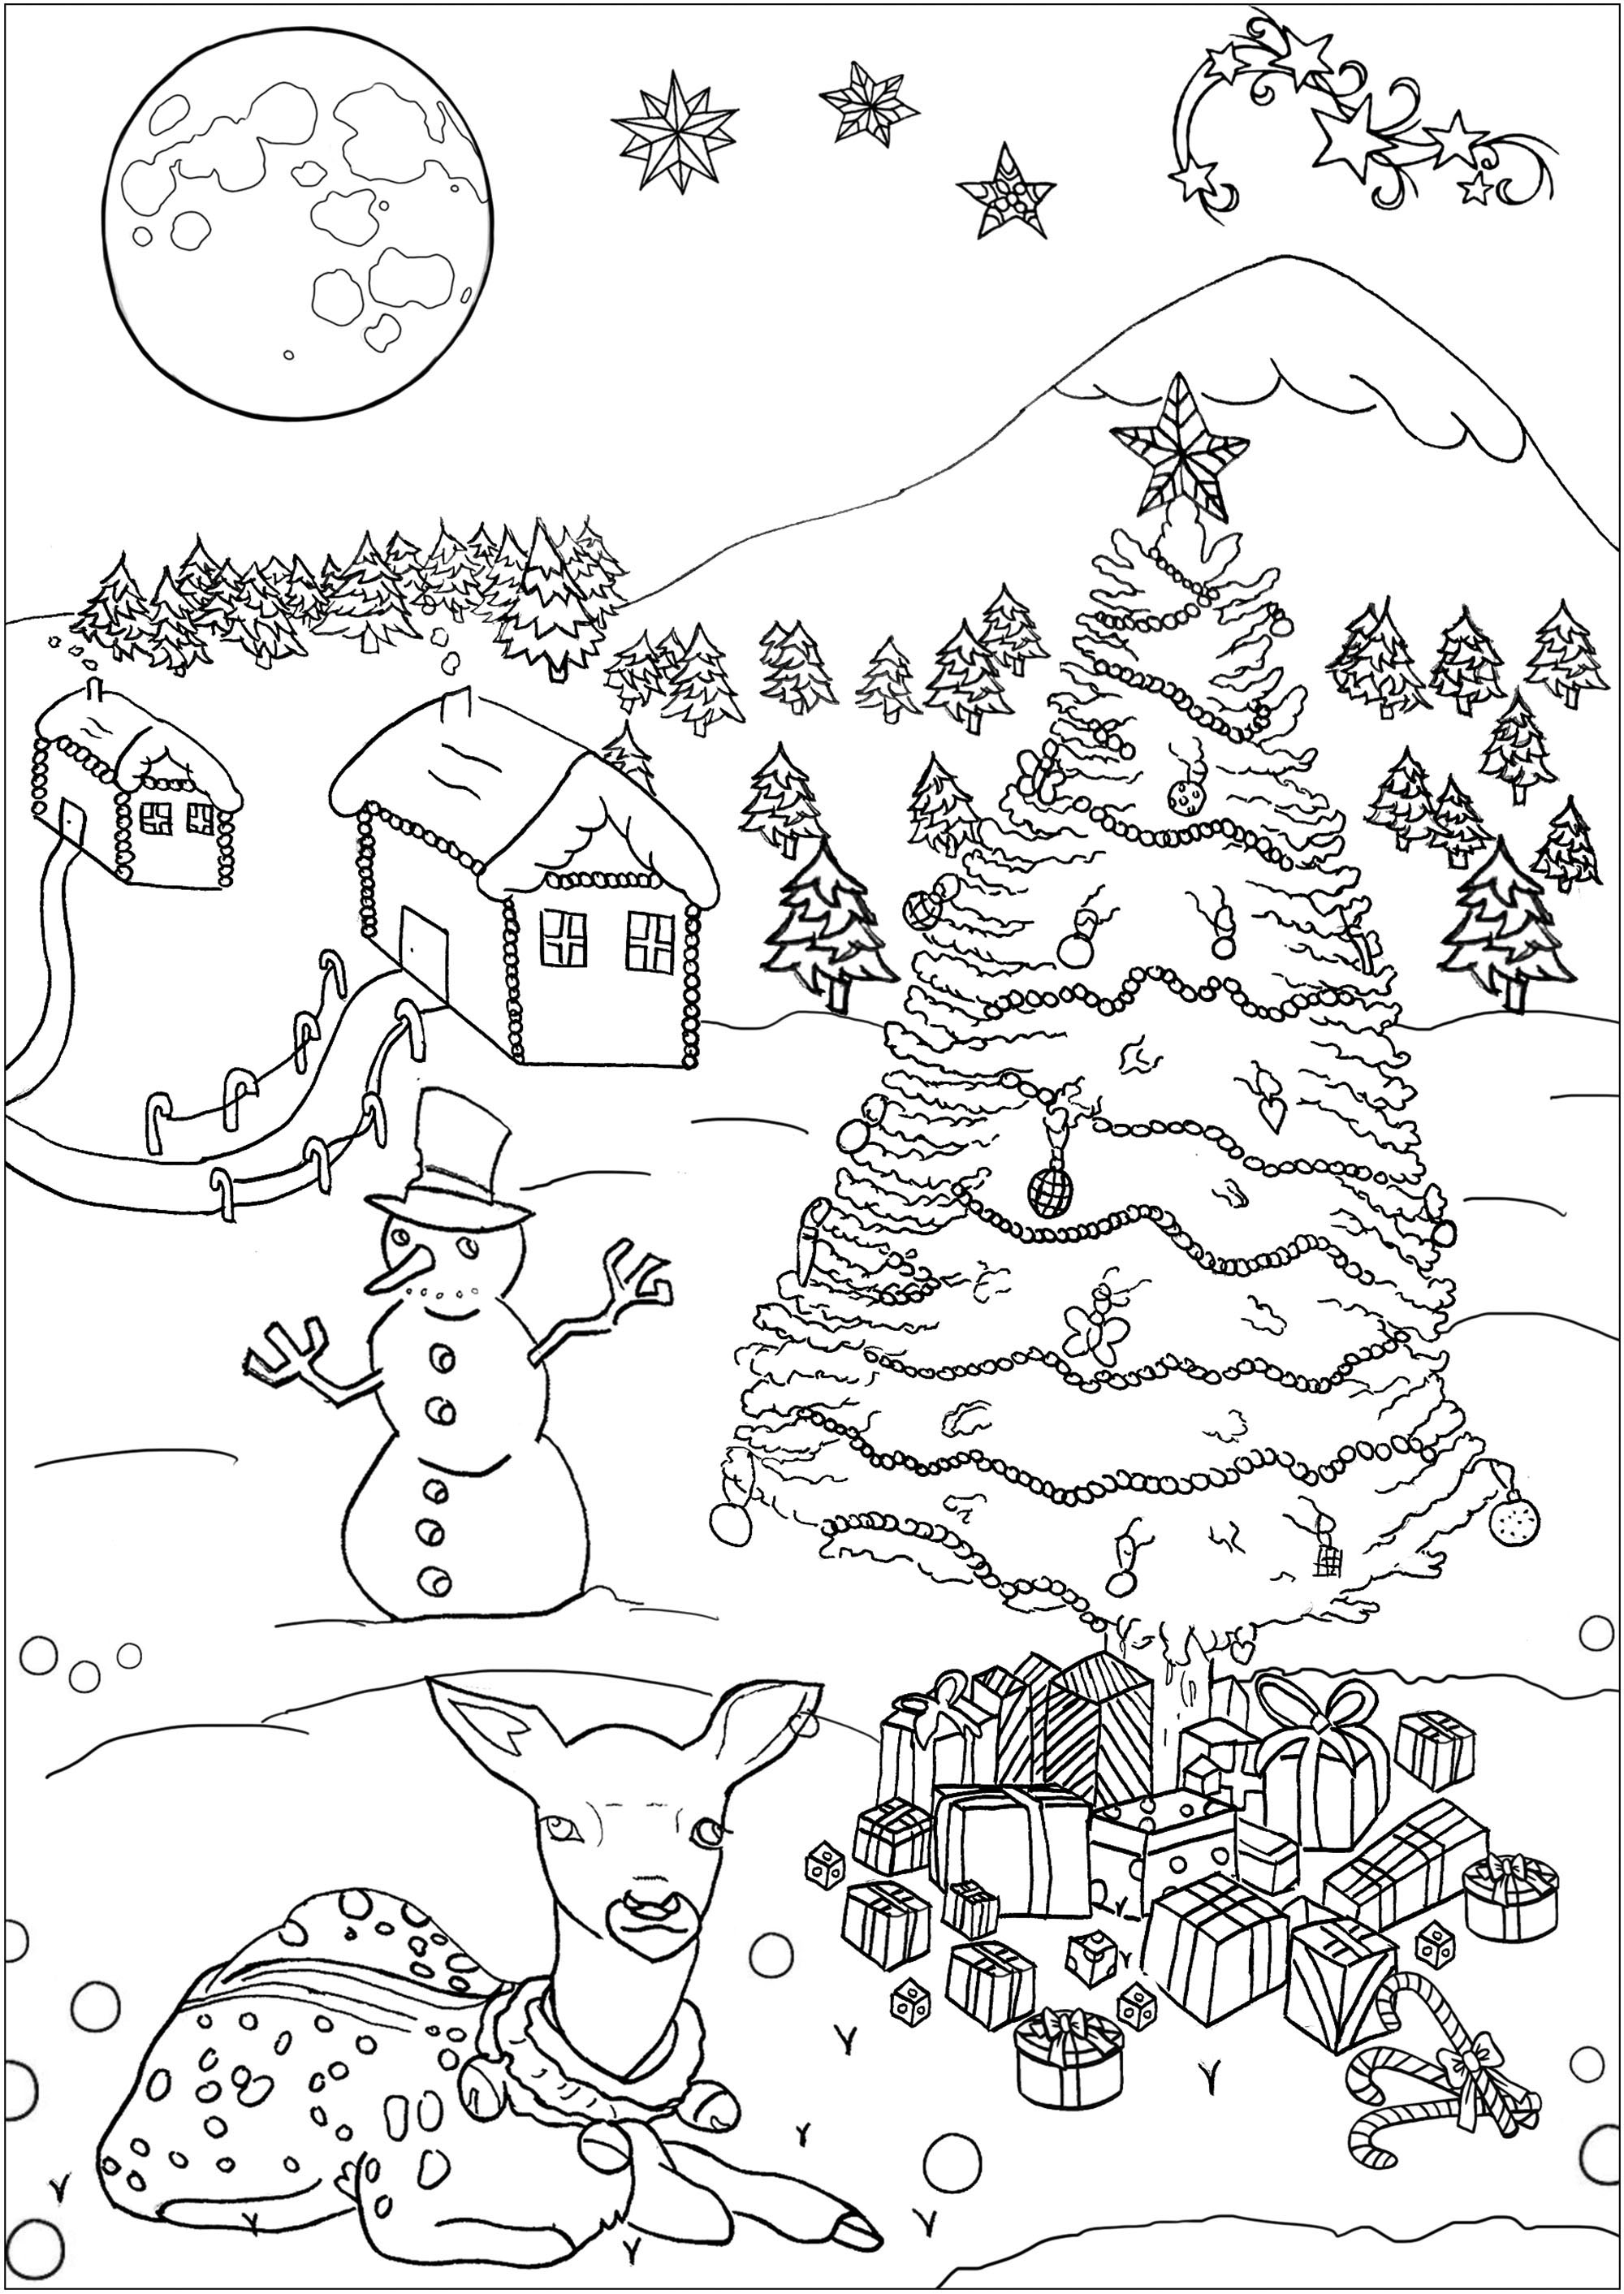 christmas-coloring-sheets-for-older-kids-and-adults-101-coloring